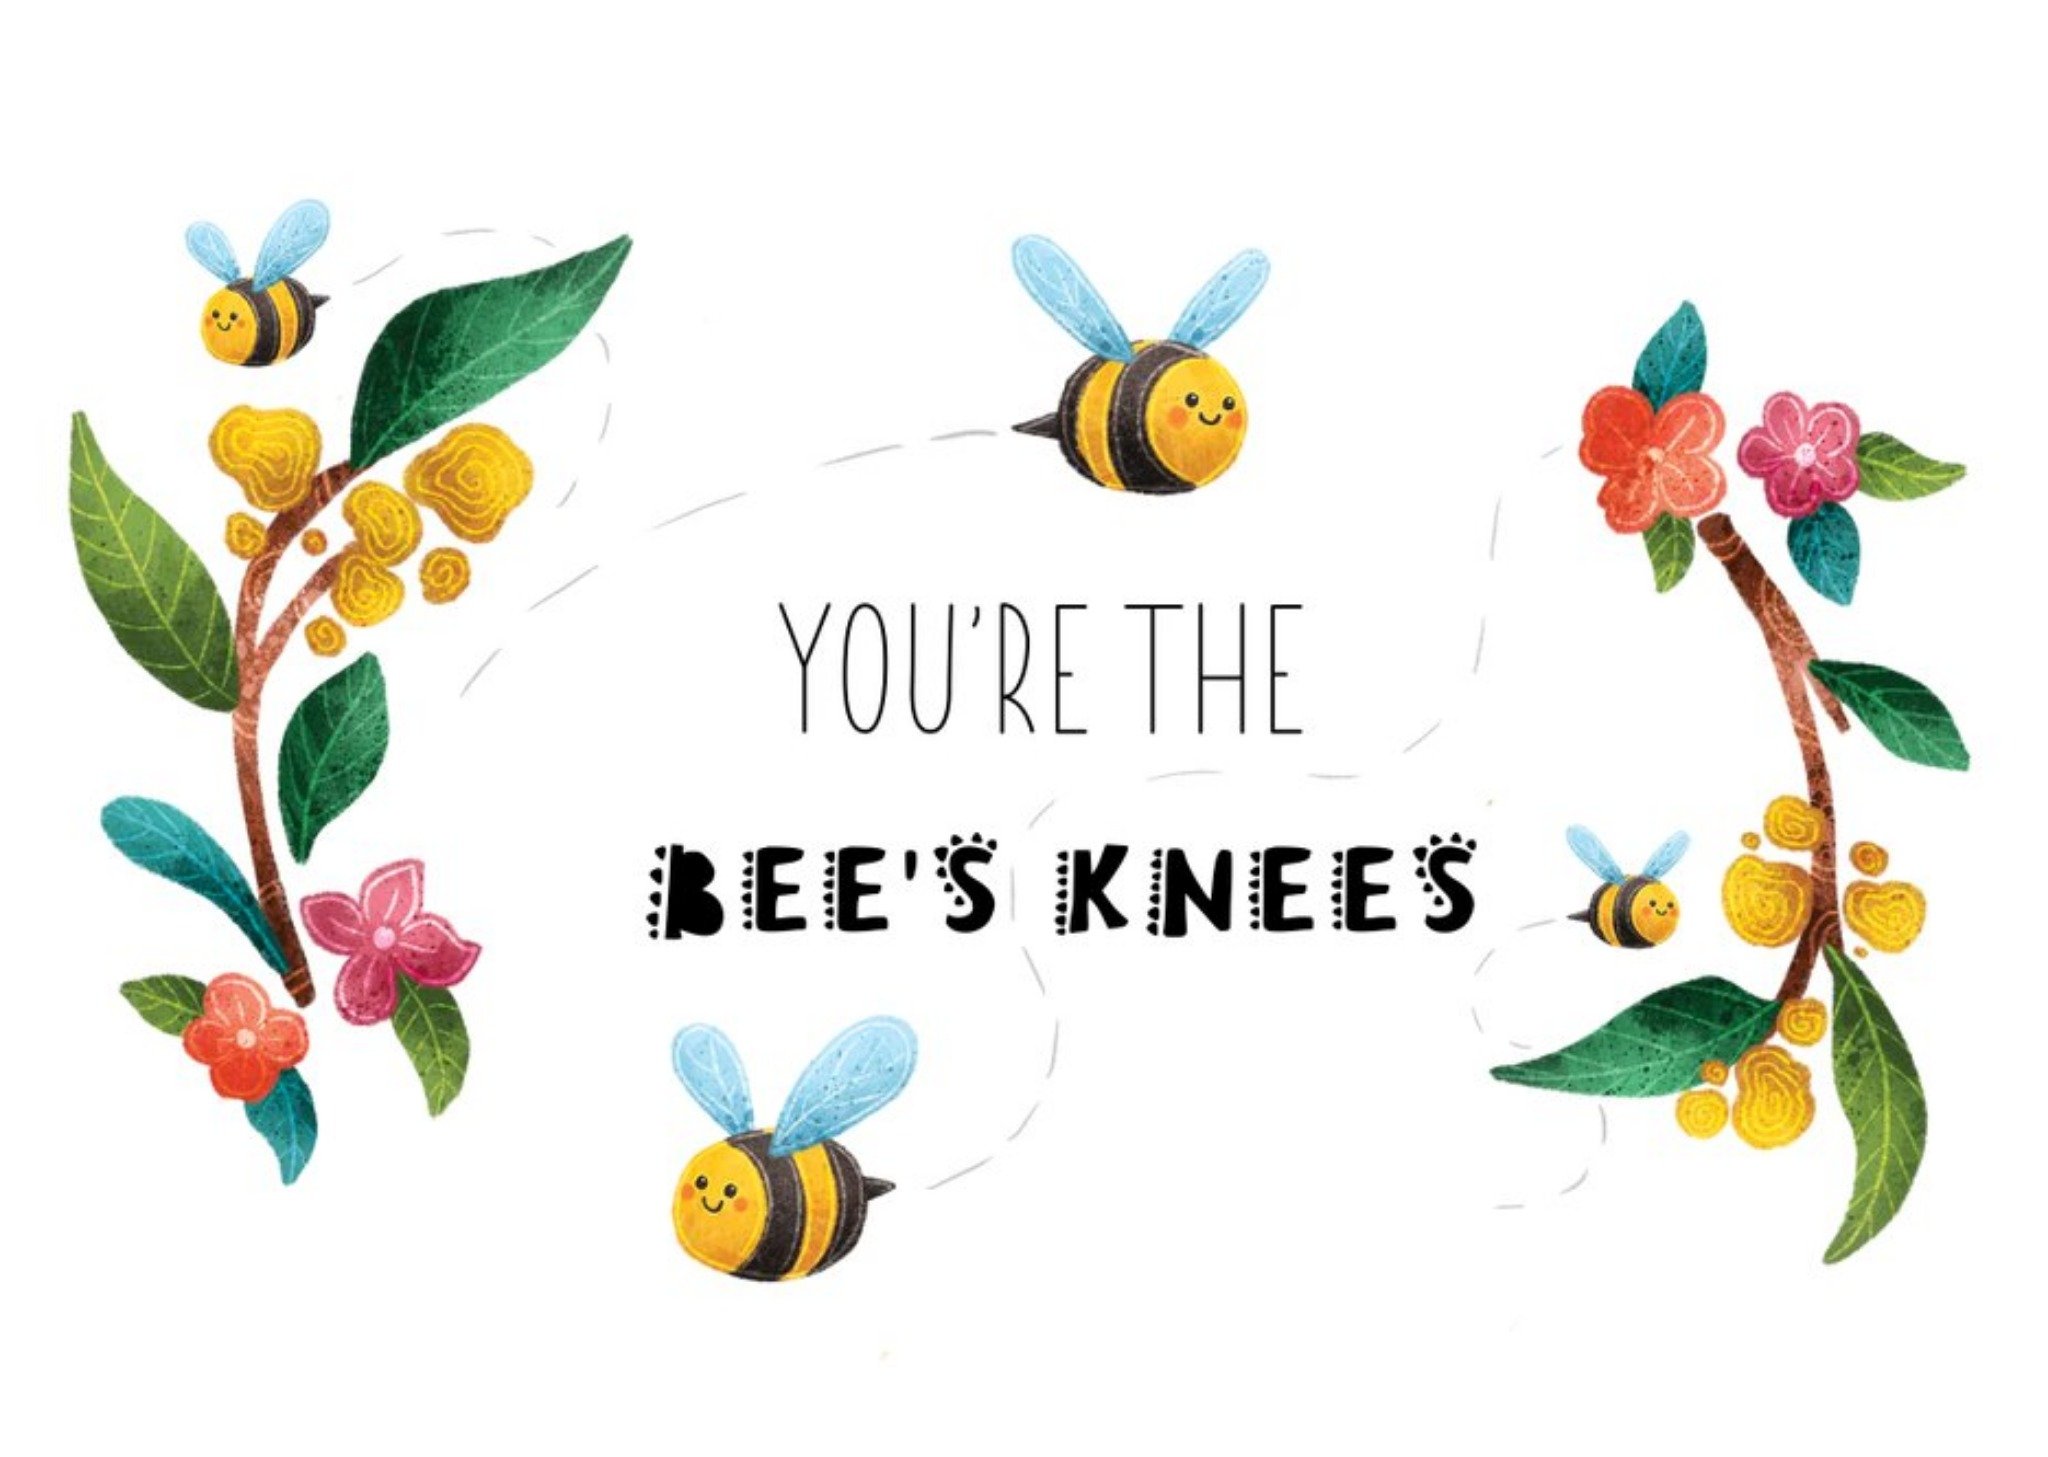 Moonpig Illustration Of Bees Buzzing Around Flowers You're The Bee's Knees Card Ecard